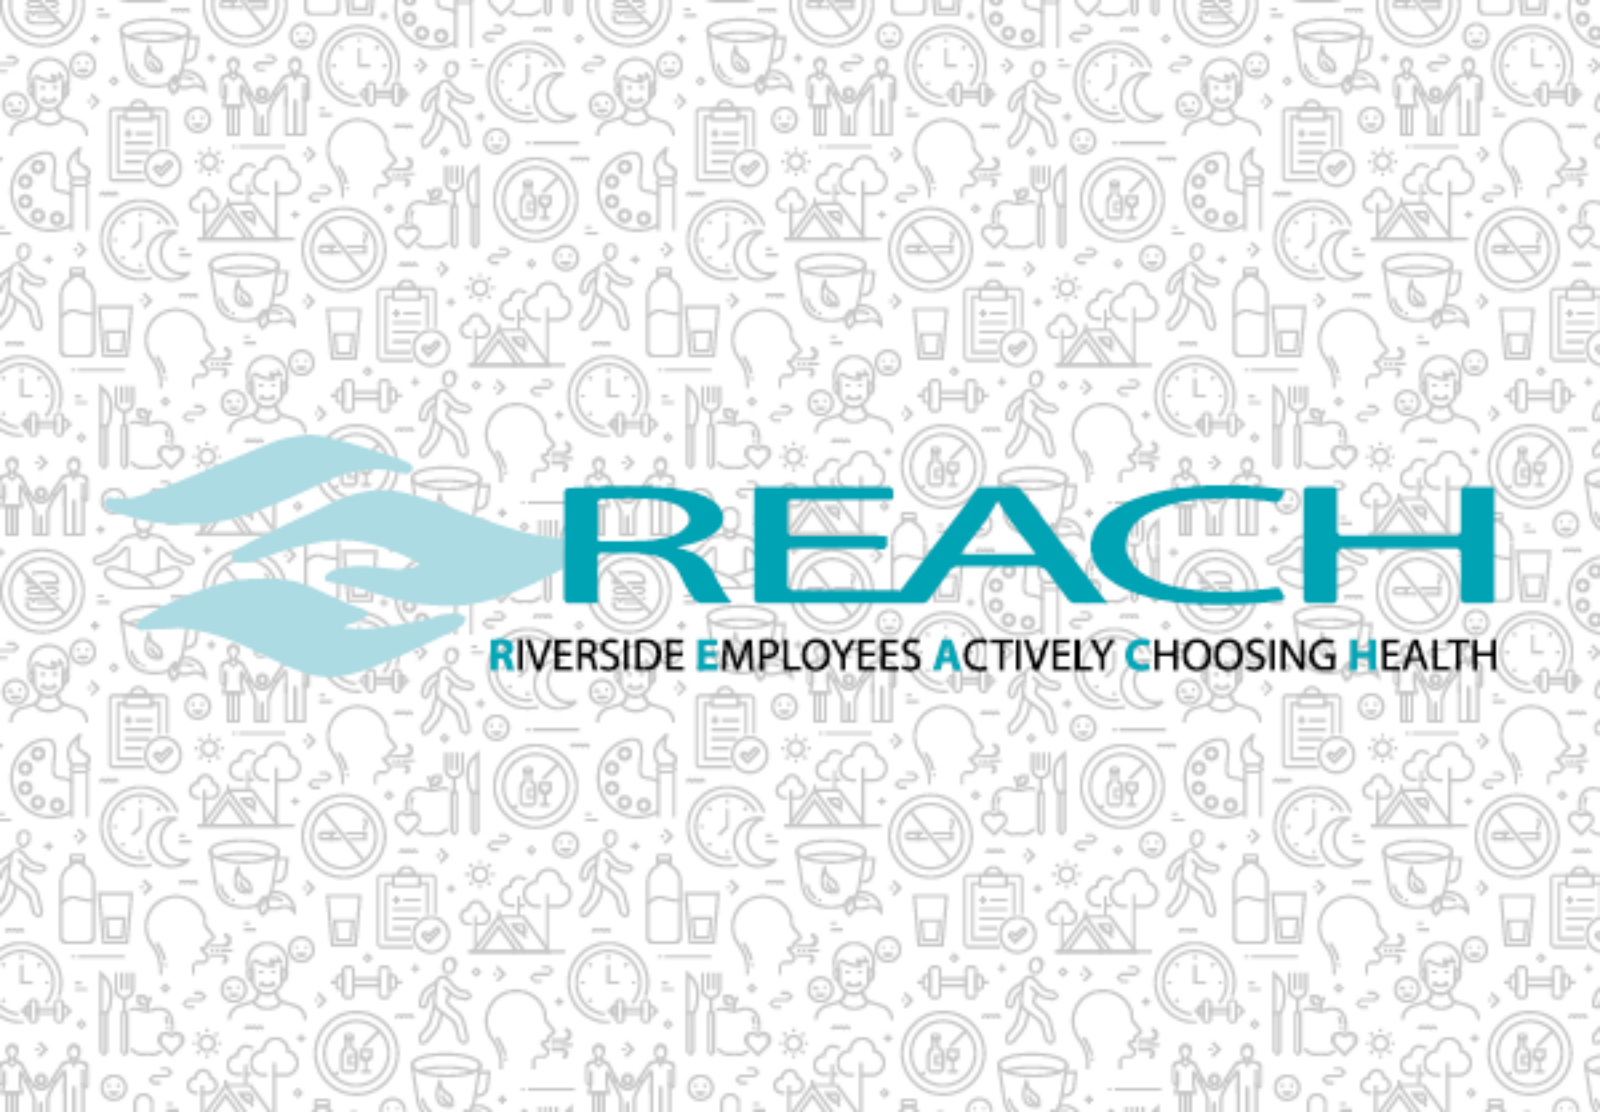 Change to Level 2 & 3 REACH-RMG Provider NOT Required